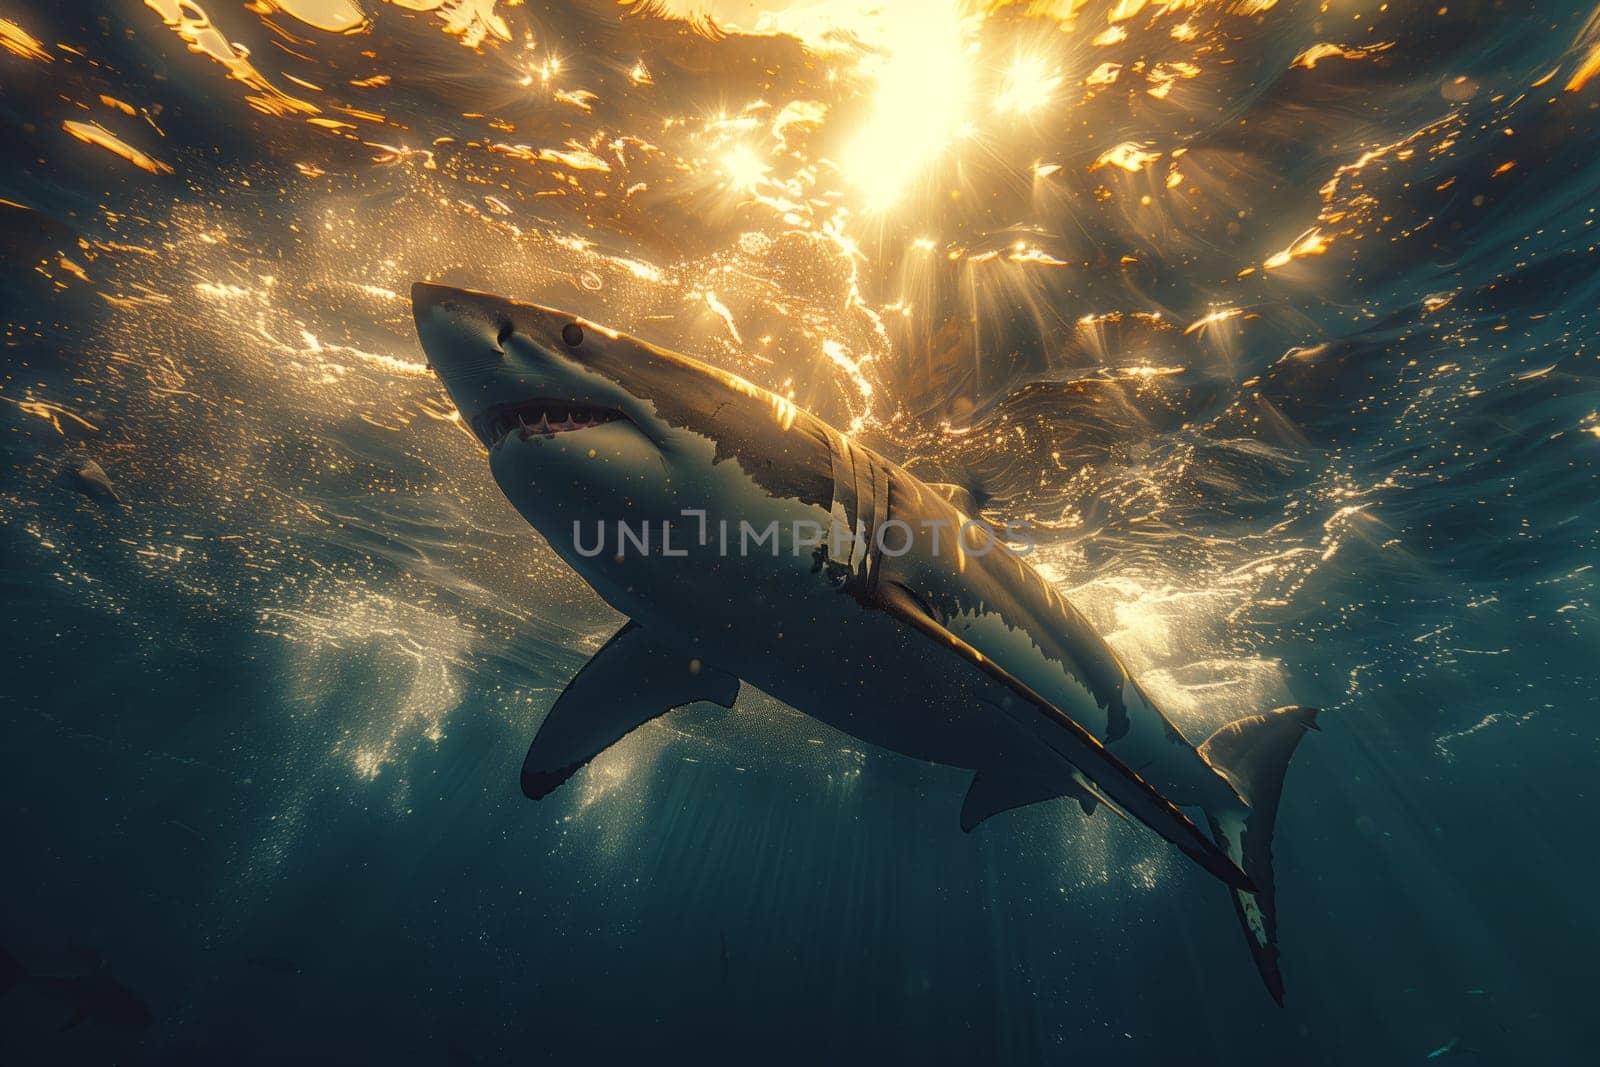 A Lamnidae shark swims fluidly in the underwater ocean by richwolf